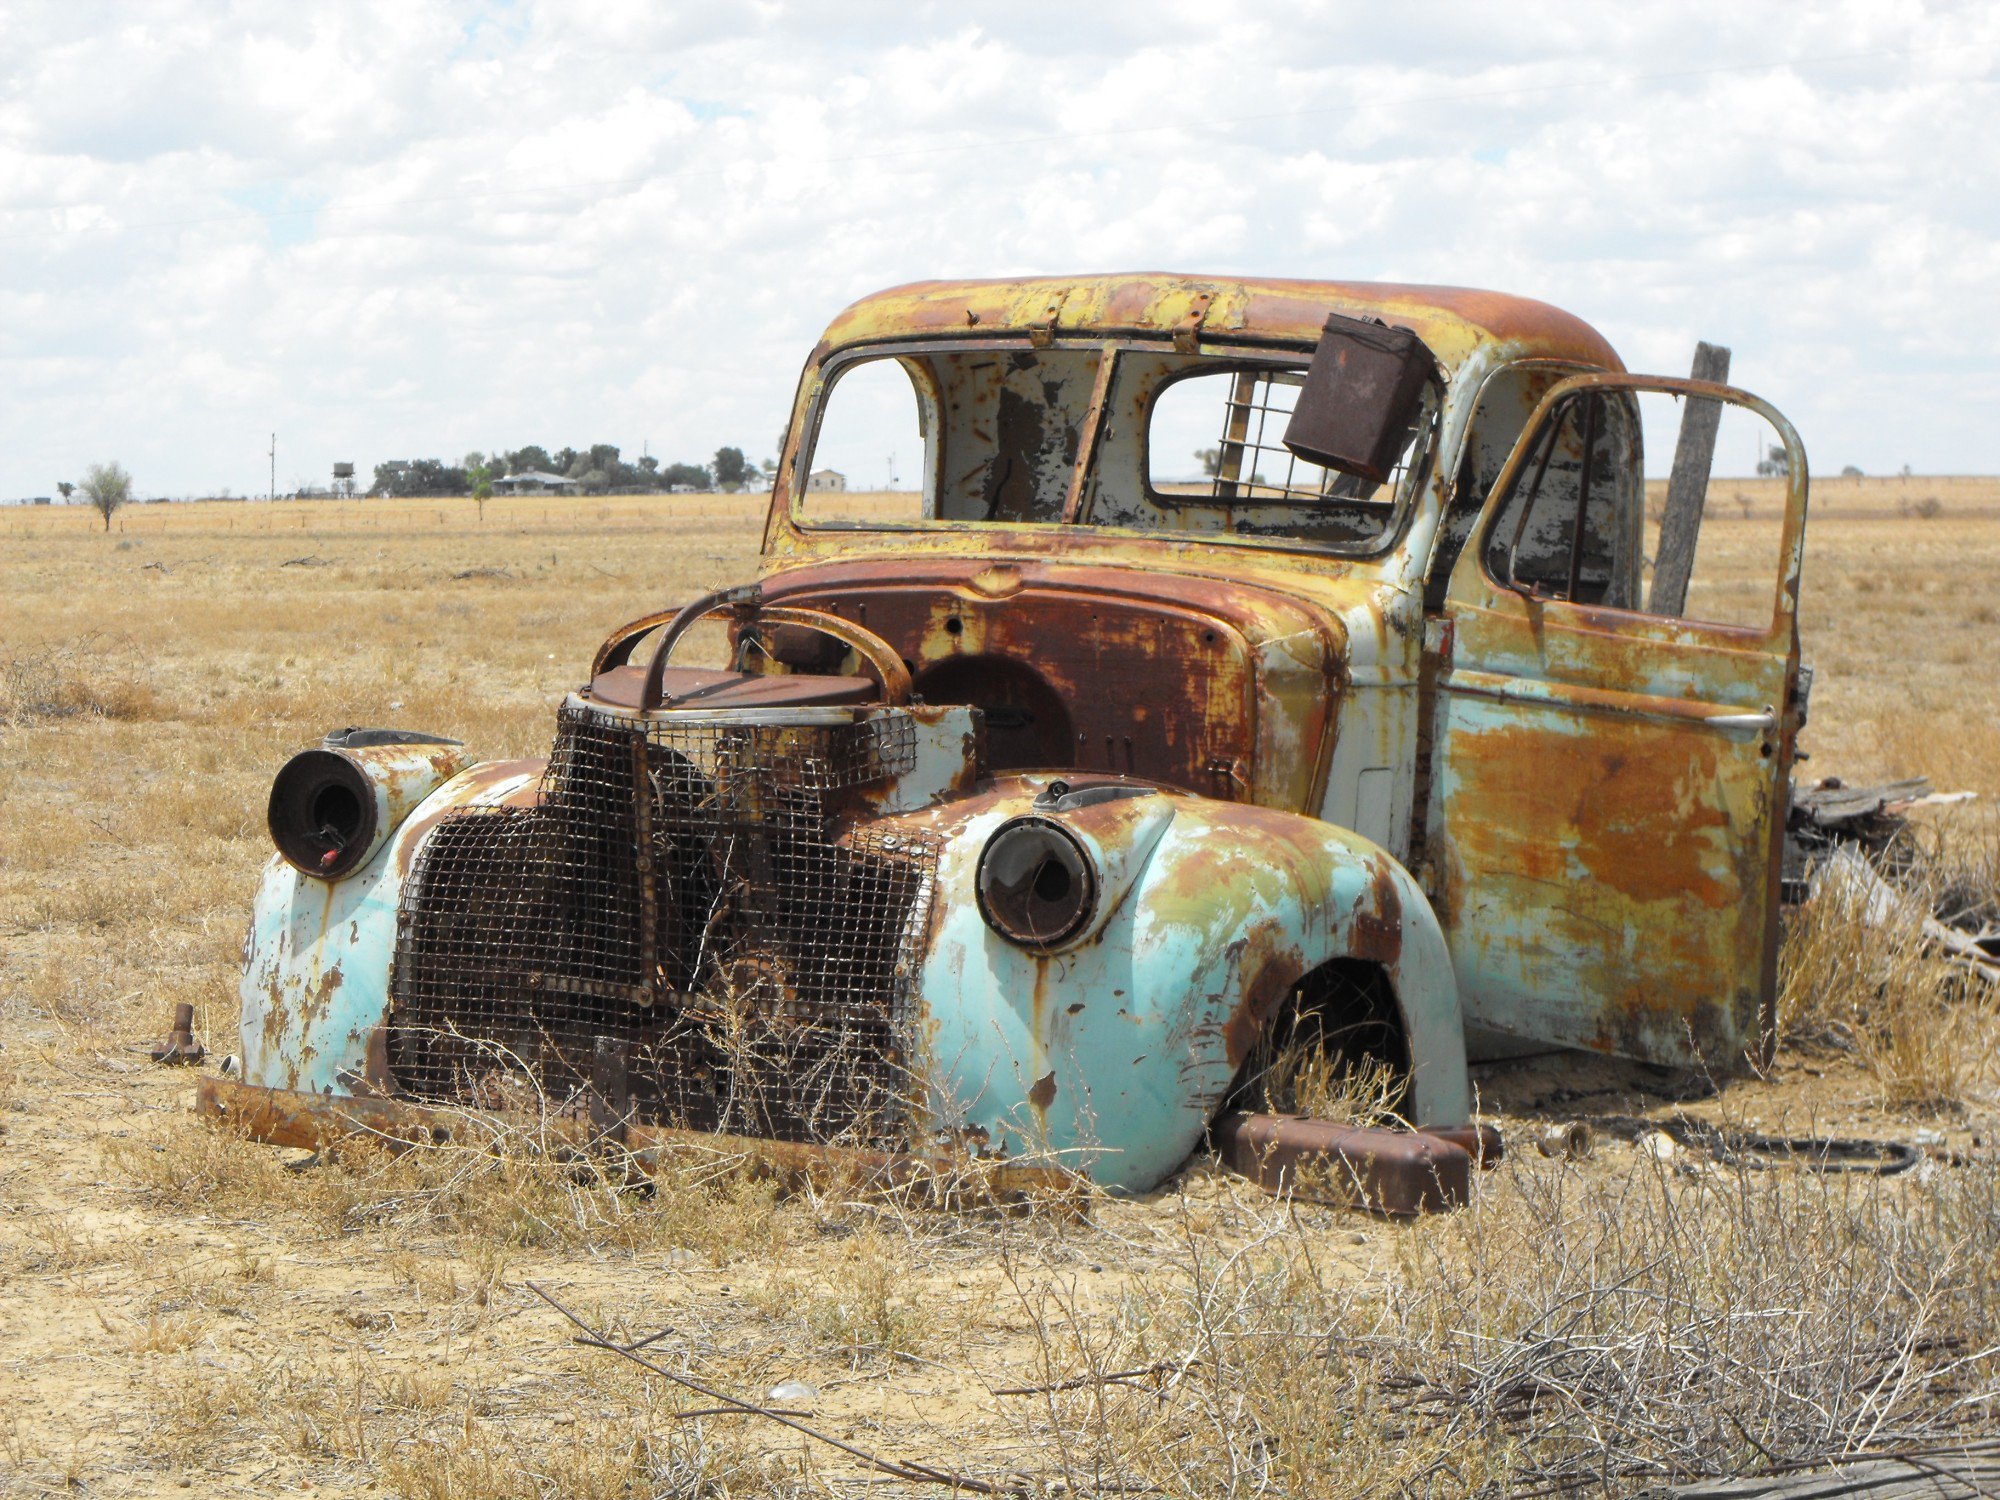 How to Sell a Junk Car: 8 Things to Do Before You Junk Your Car